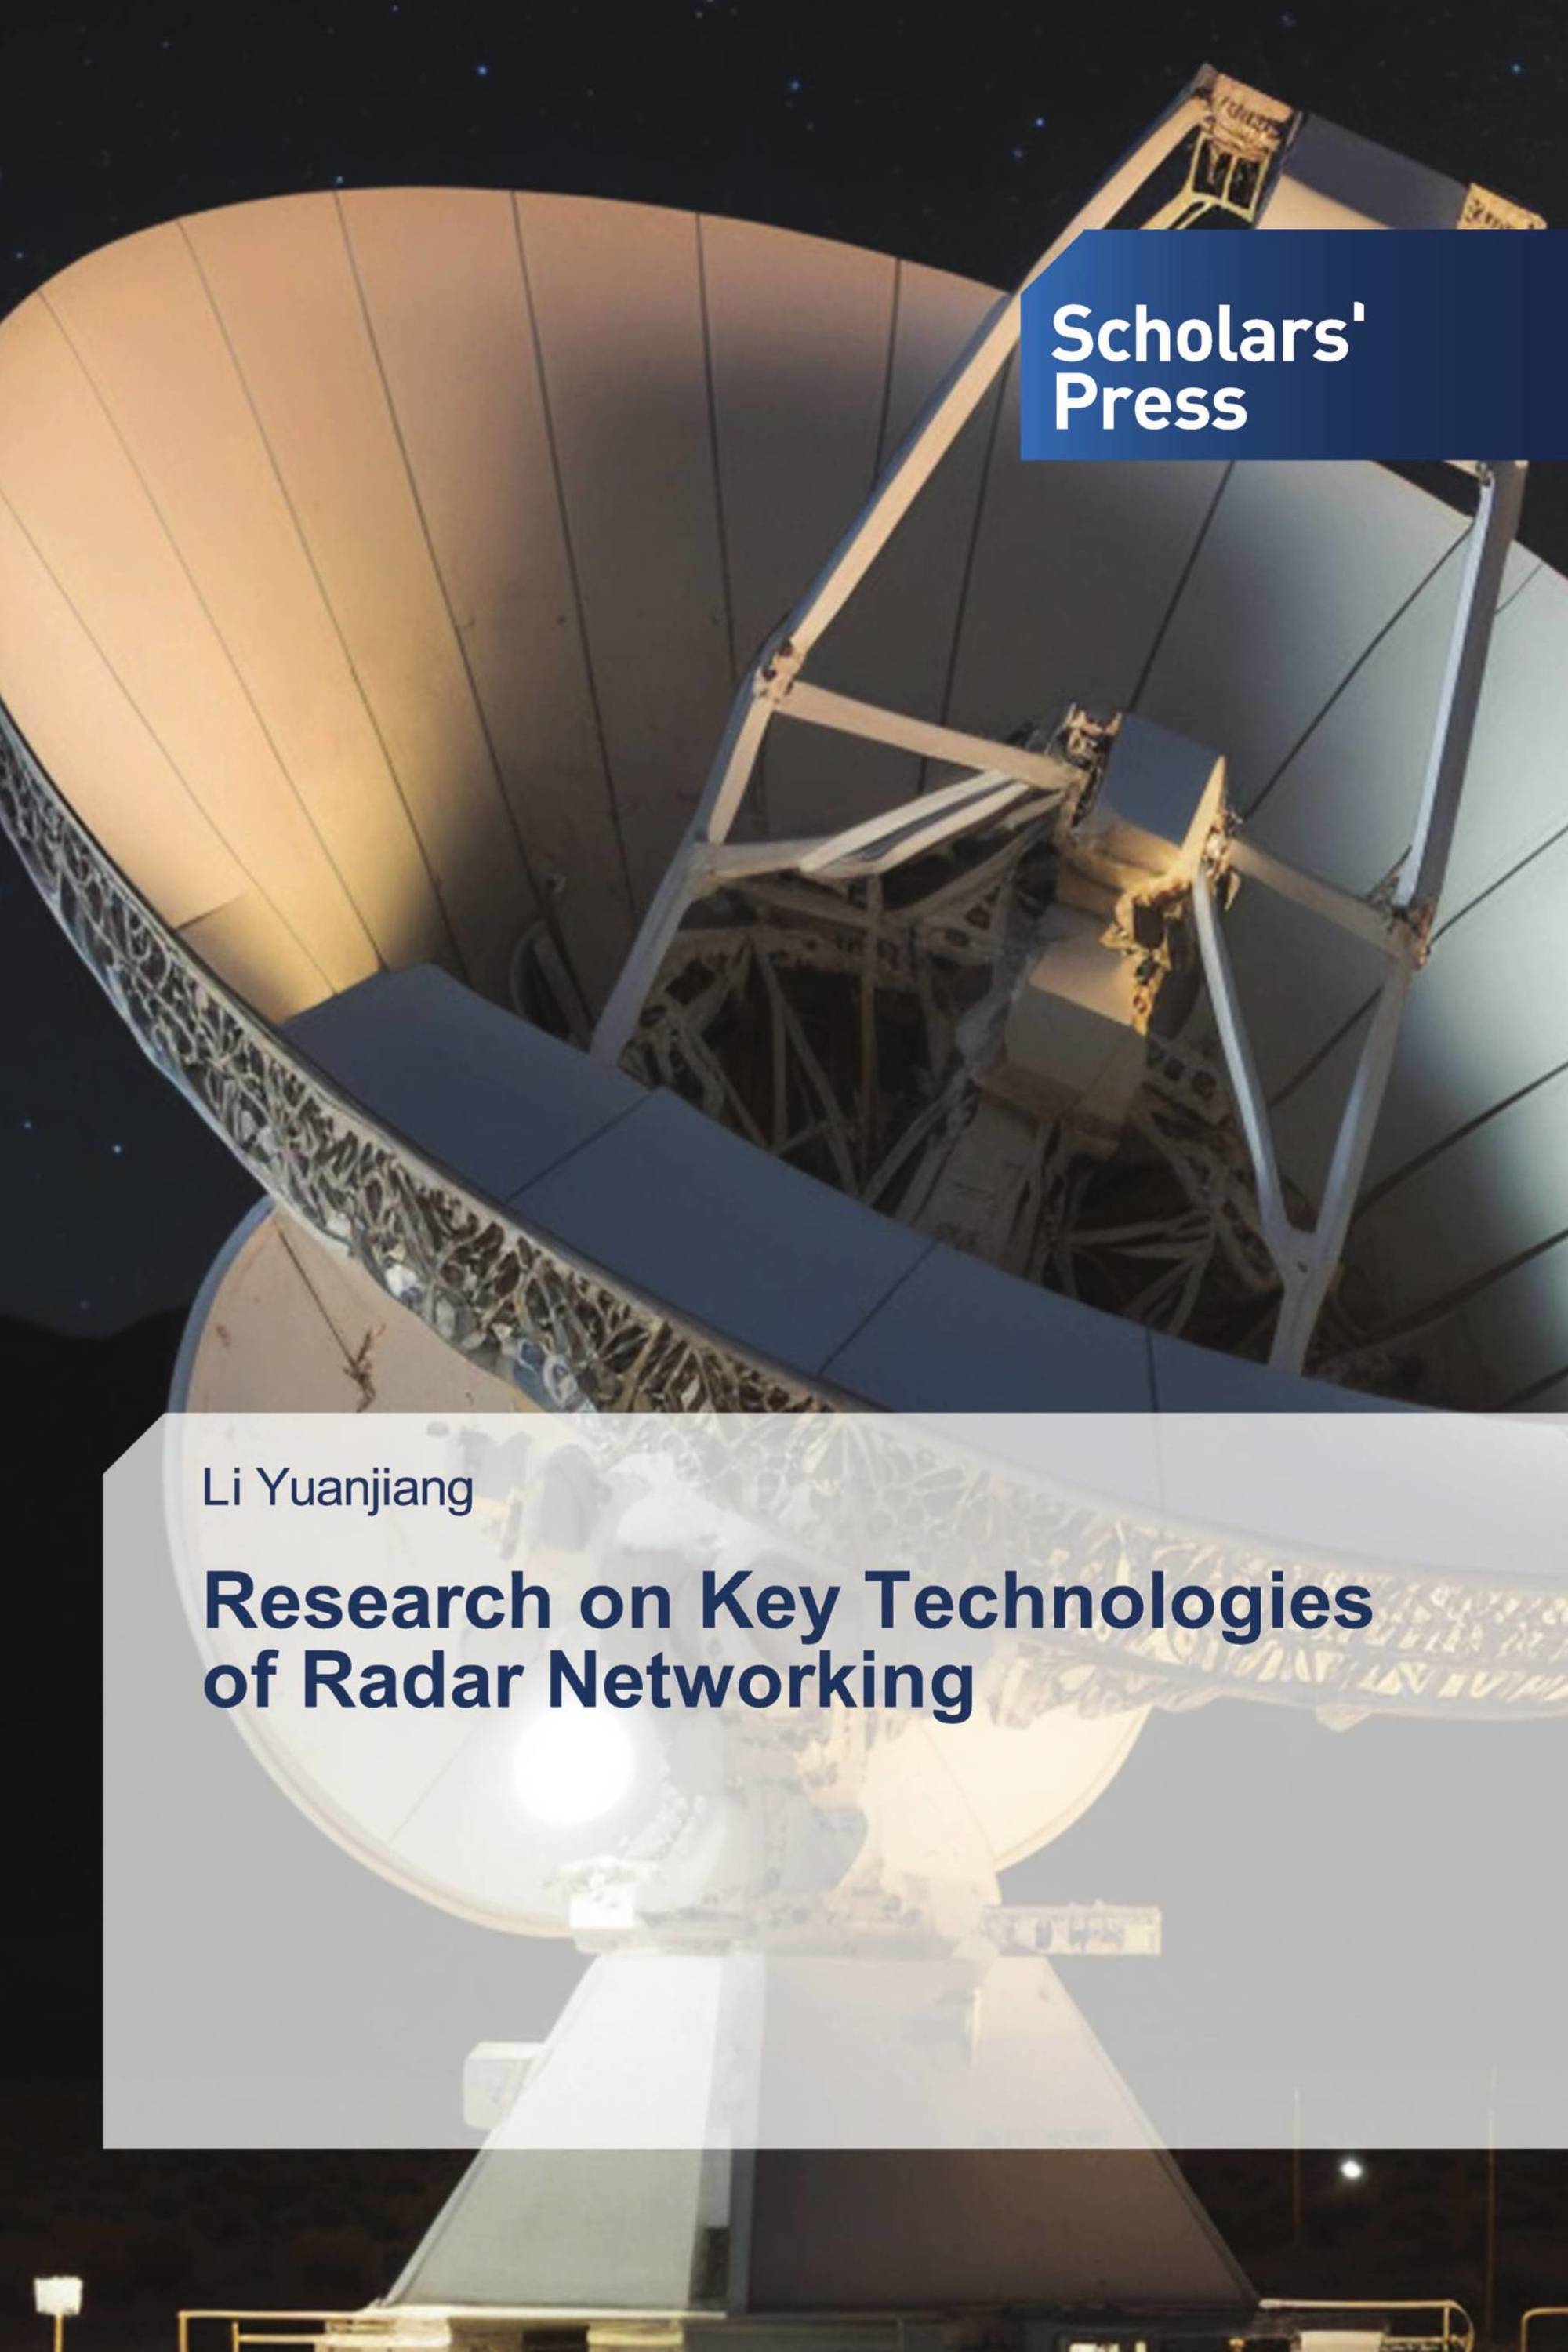 Research on Key Technologies of Radar Networking